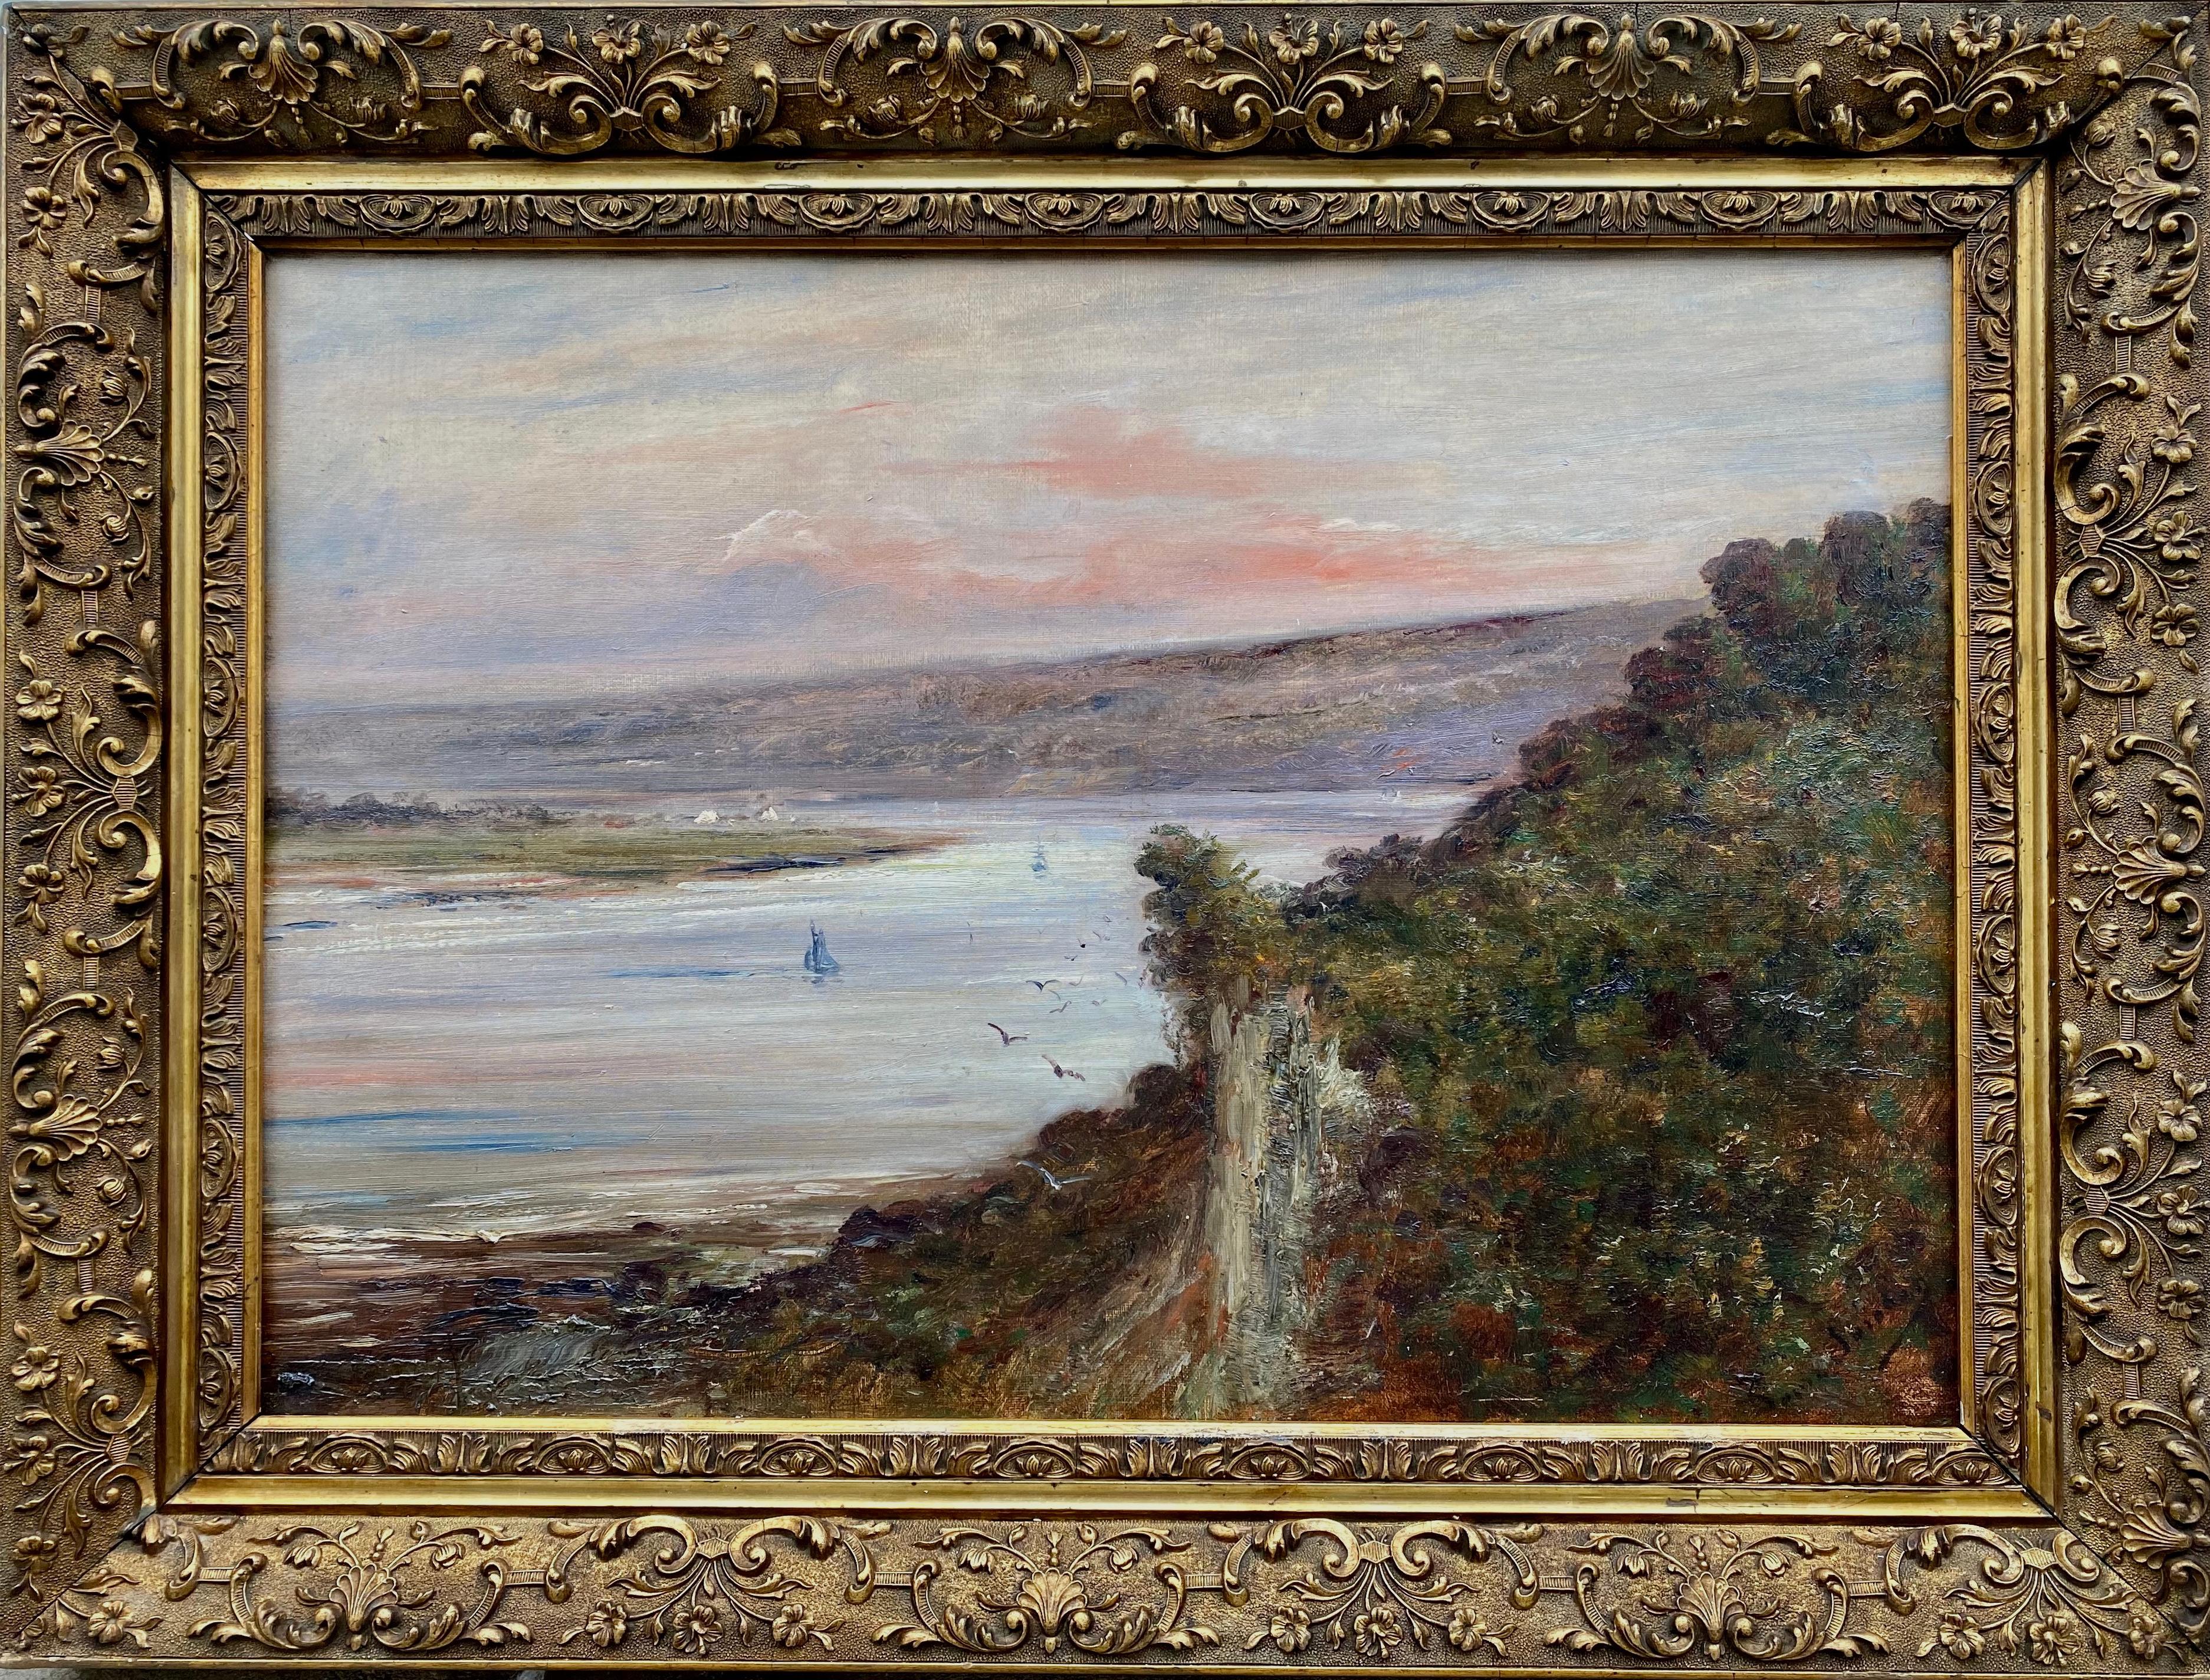 A fresh and atmospheric painting depicting the vast River Seine seen from the cliffs near its estuary in coastal Normandy. It is incredibly modern for its time: if the definition of Impressionism is 